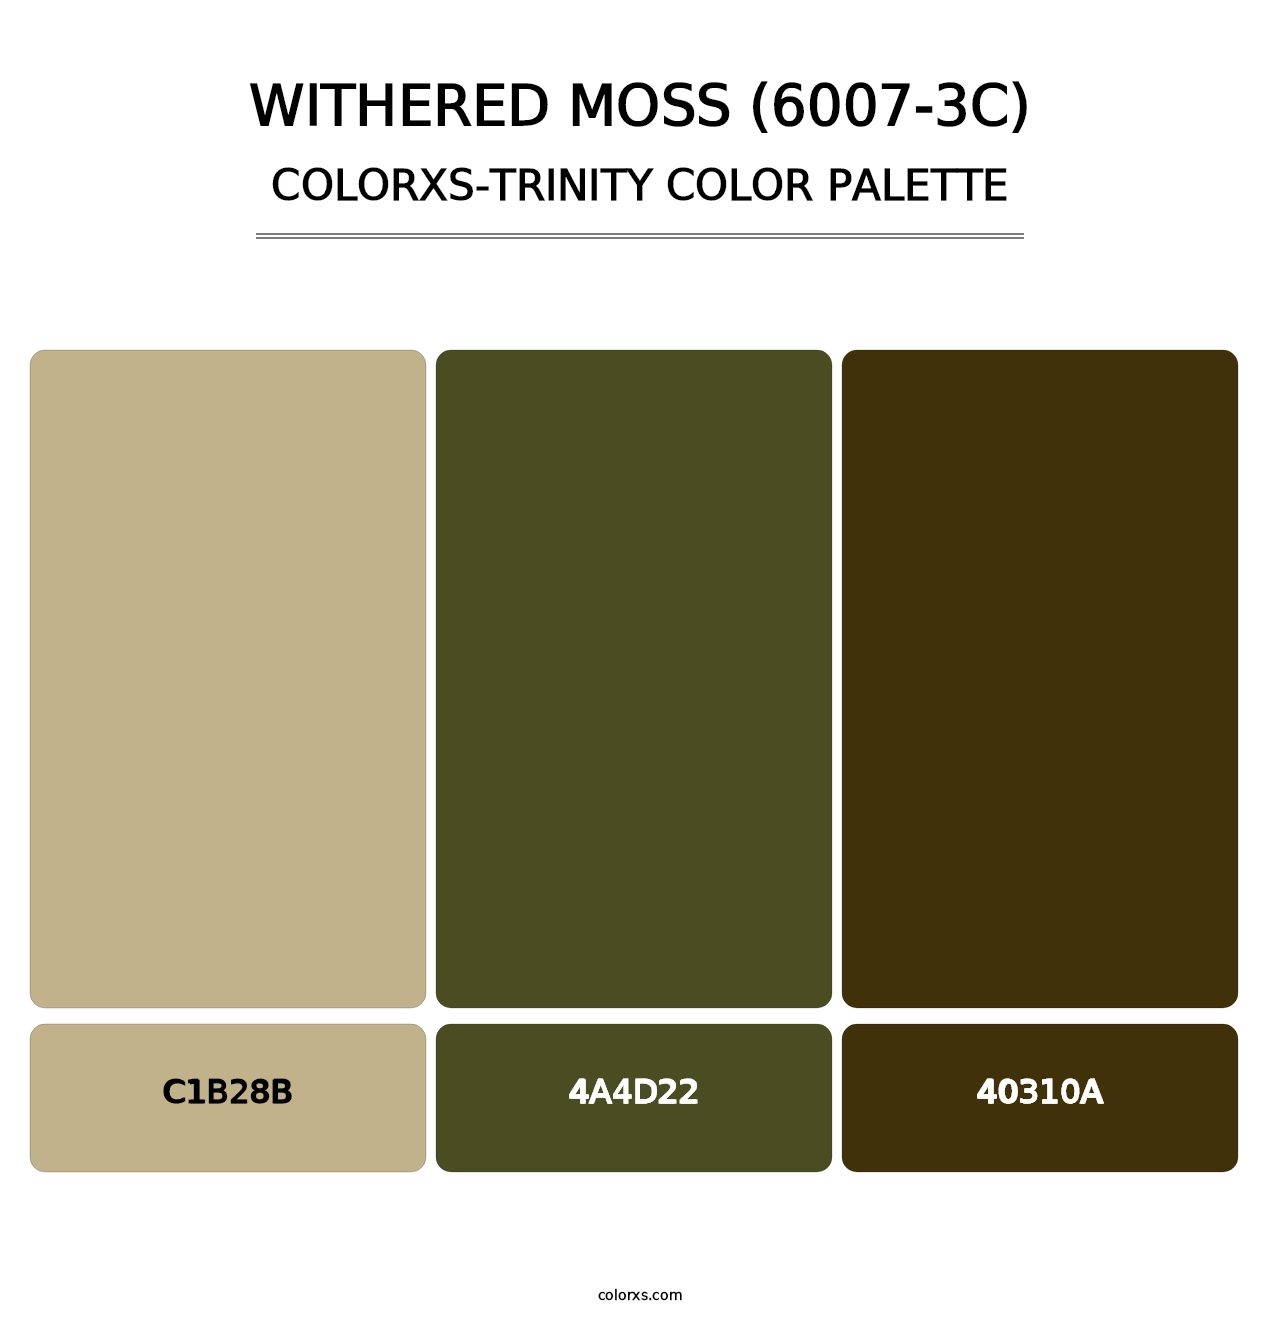 Withered Moss (6007-3C) - Colorxs Trinity Palette